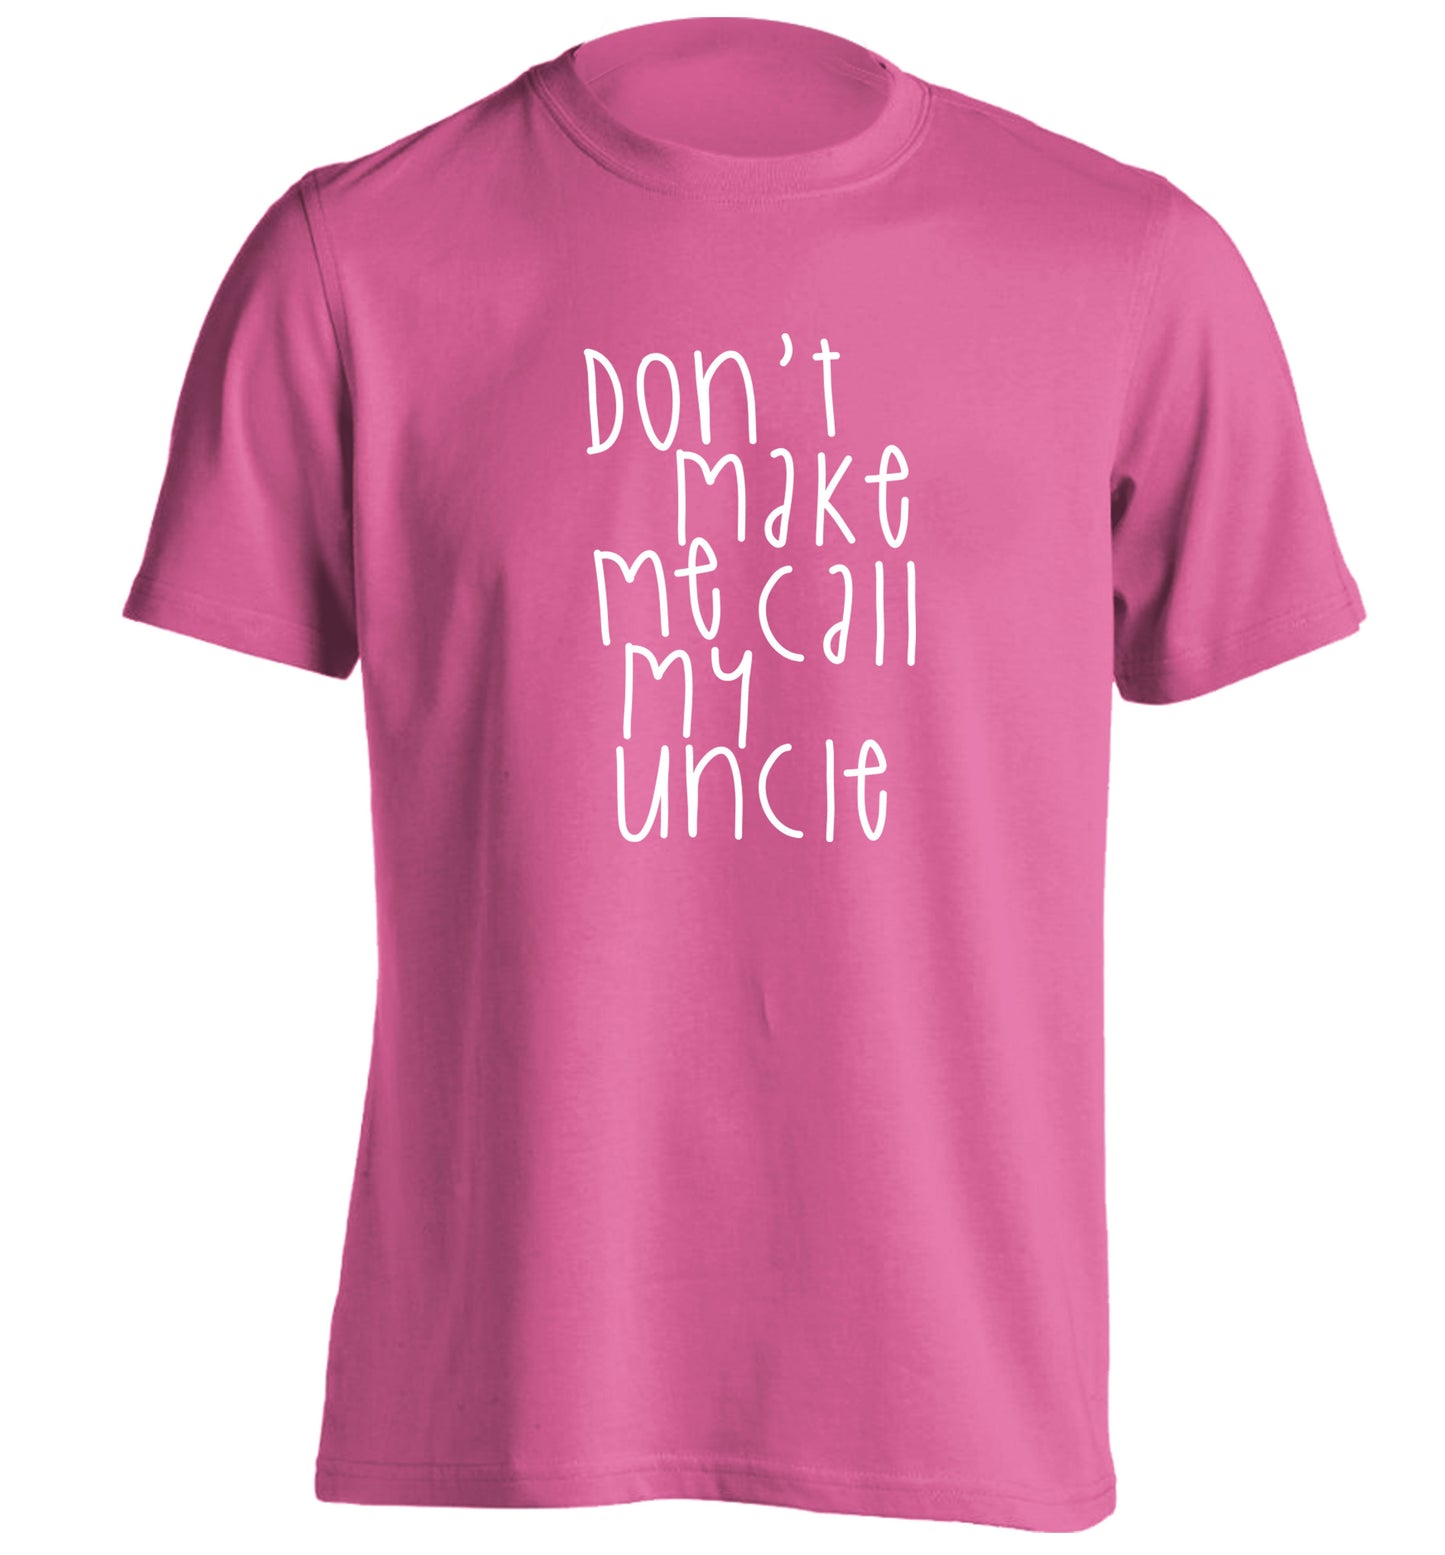 Don't make me call my uncle adults unisex pink Tshirt 2XL